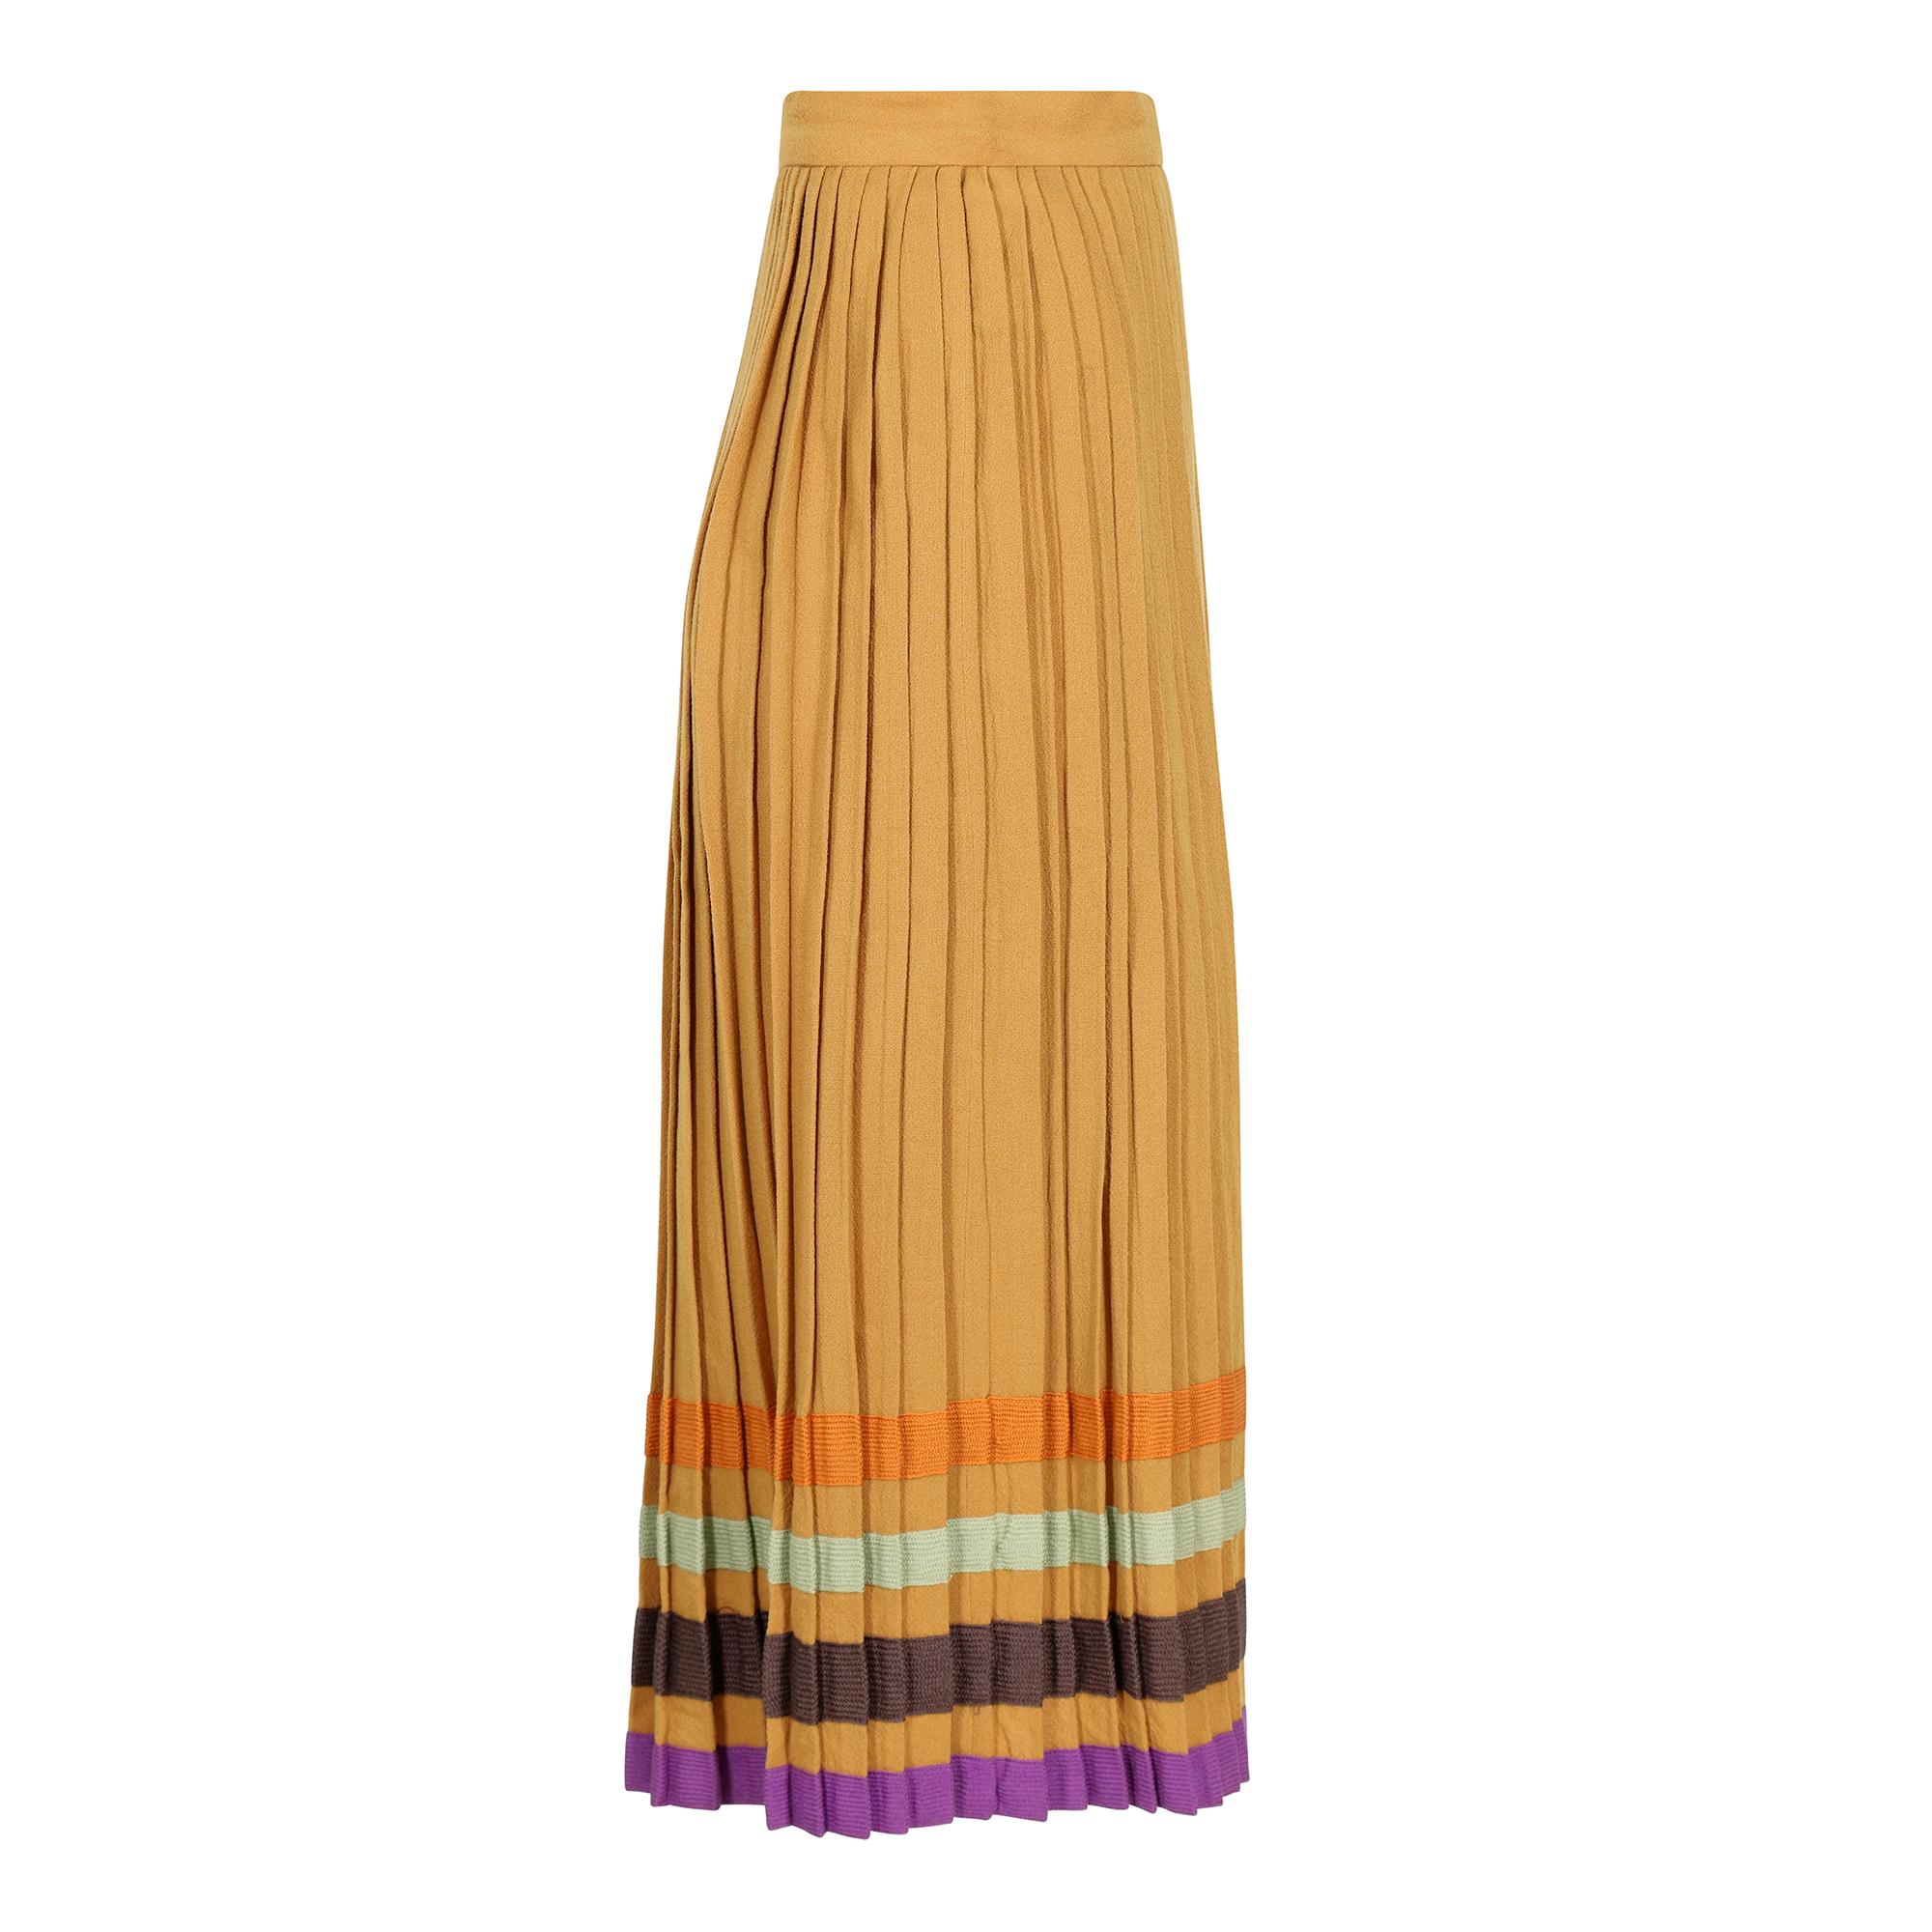 An extremely wearable late 1970s Bill Gibb mainline wool accordion pleat skirt.  This piece is in a rich warm tone of ochre adorned with four horizontal bands that form the lower section of the skirt in an array of contrasting colours - orange, lime